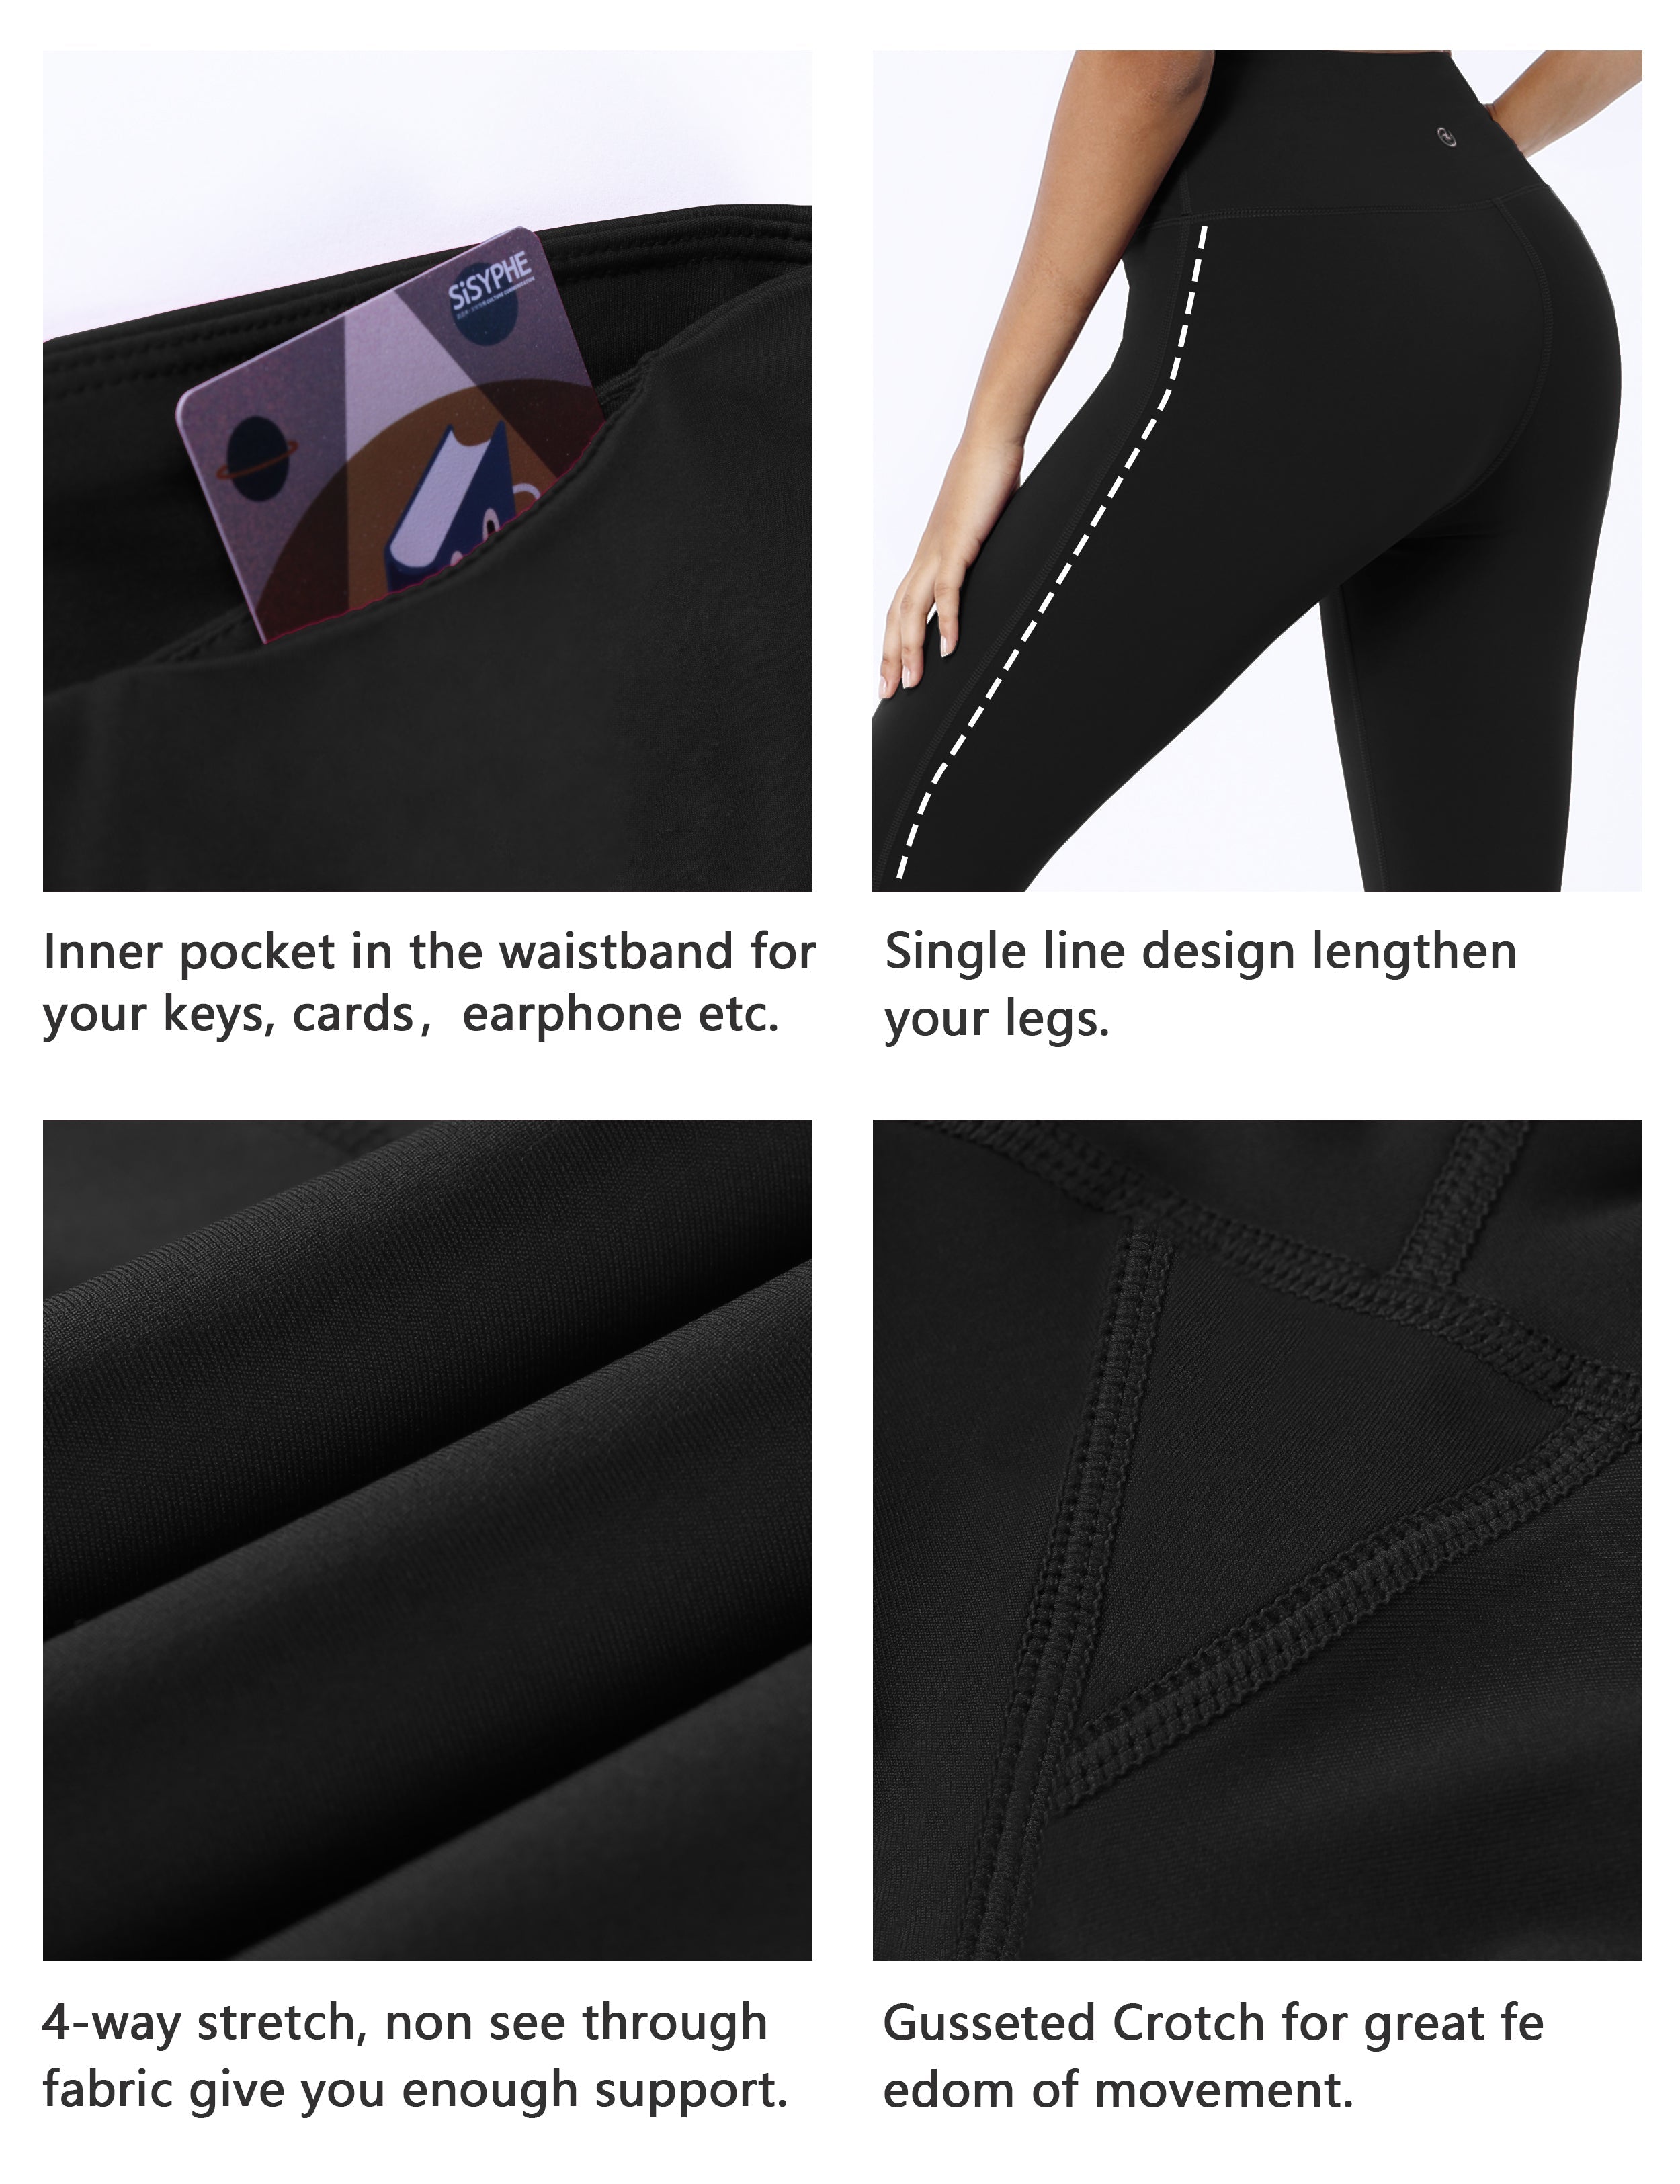 High Waist Side Line Pilates Pants black Side Line is Make Your Legs Look Longer and Thinner 75%Nylon/25%Spandex Fabric doesn't attract lint easily 4-way stretch No see-through Moisture-wicking Tummy control Inner pocket Two lengths